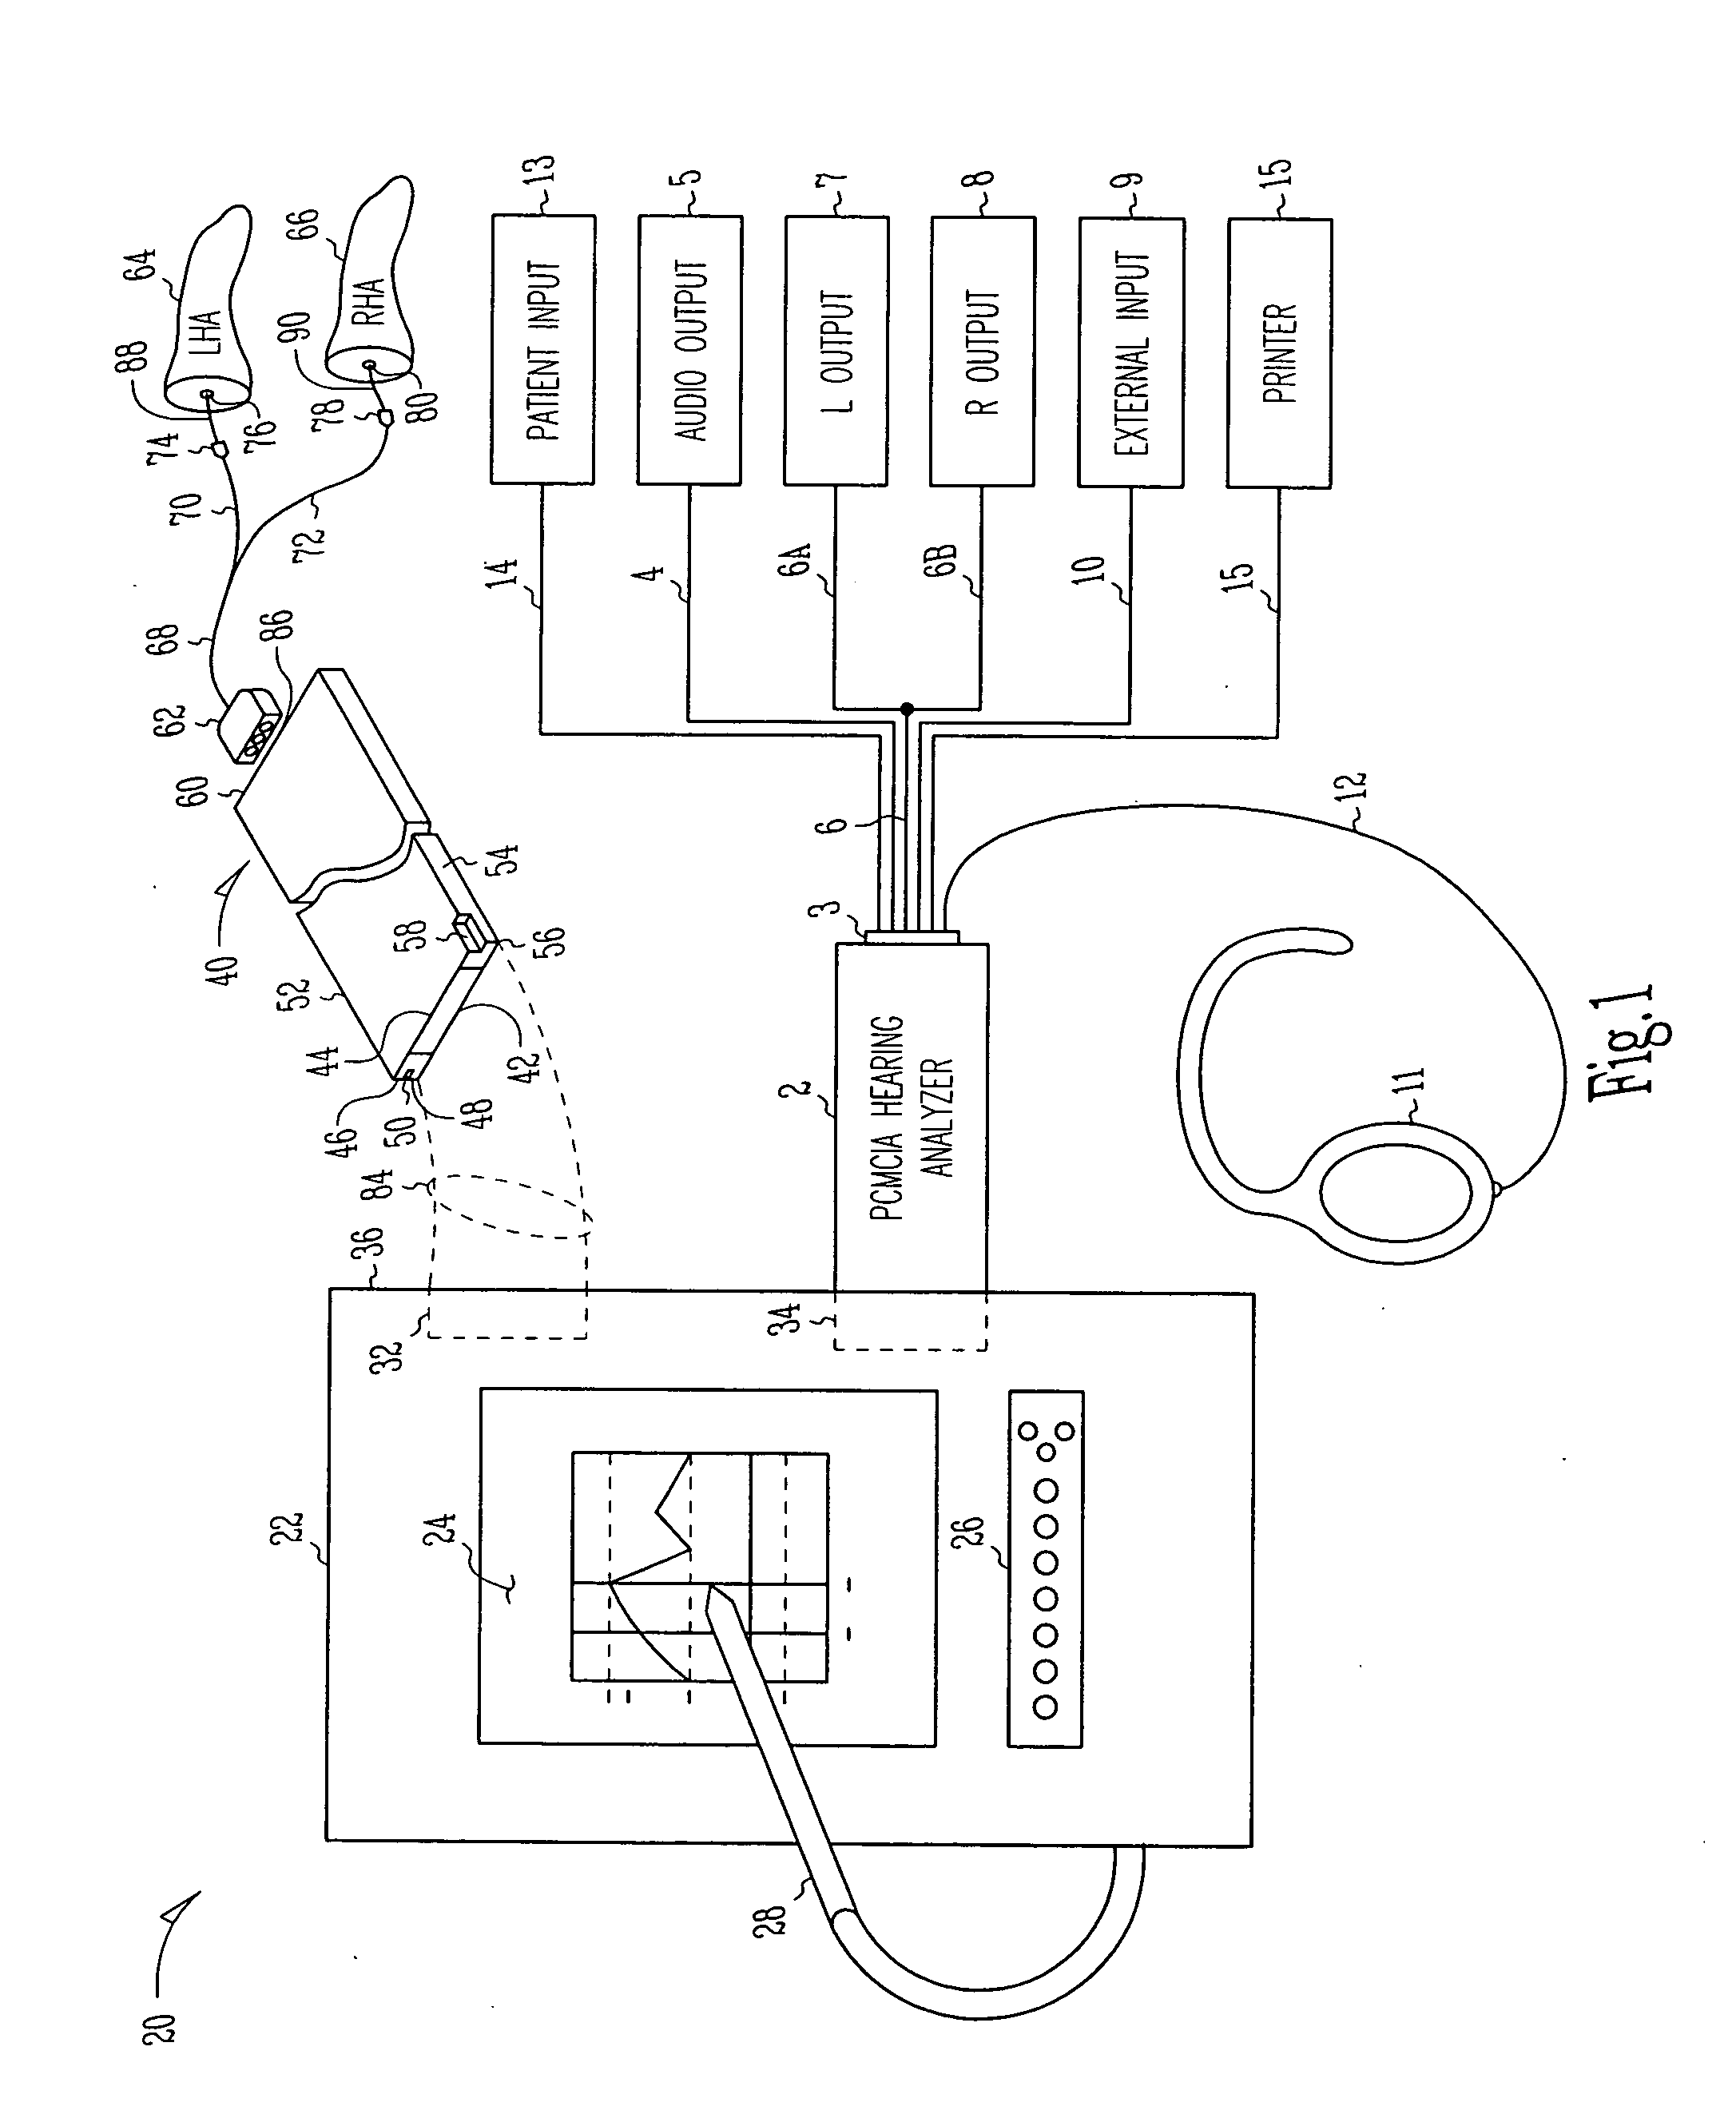 Portable hearing-related analysis system